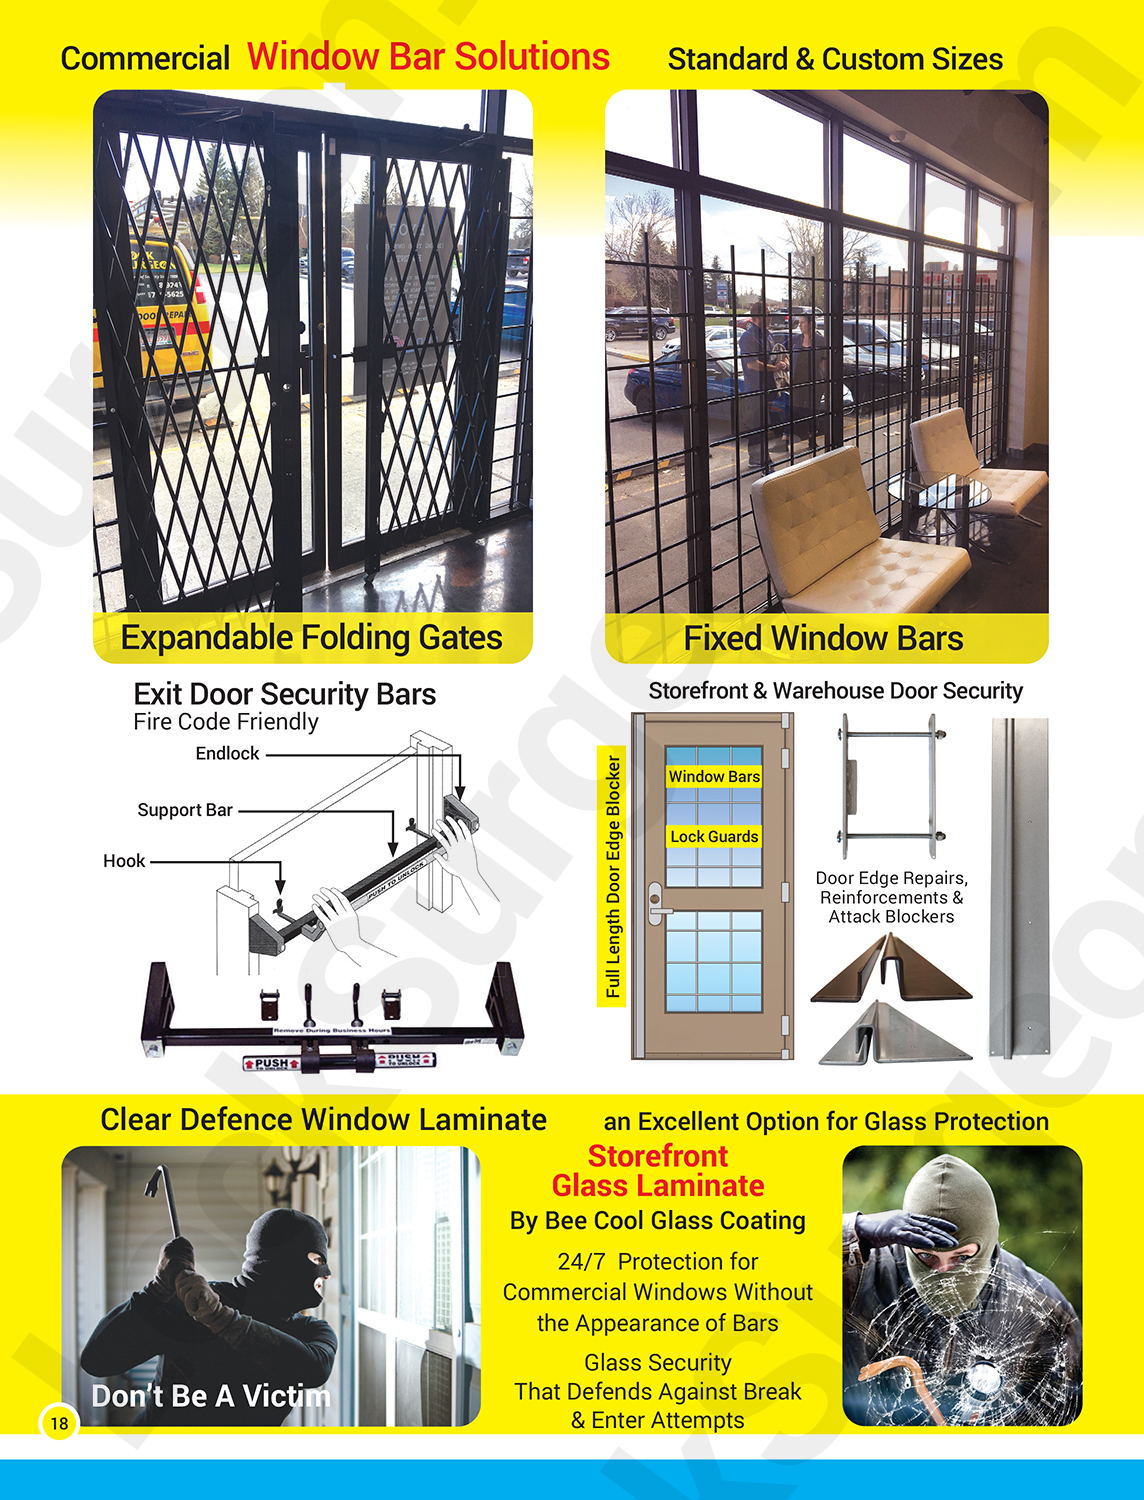 Commercial window bars, expandable folding gates, fixed window bars, exit door security bars.